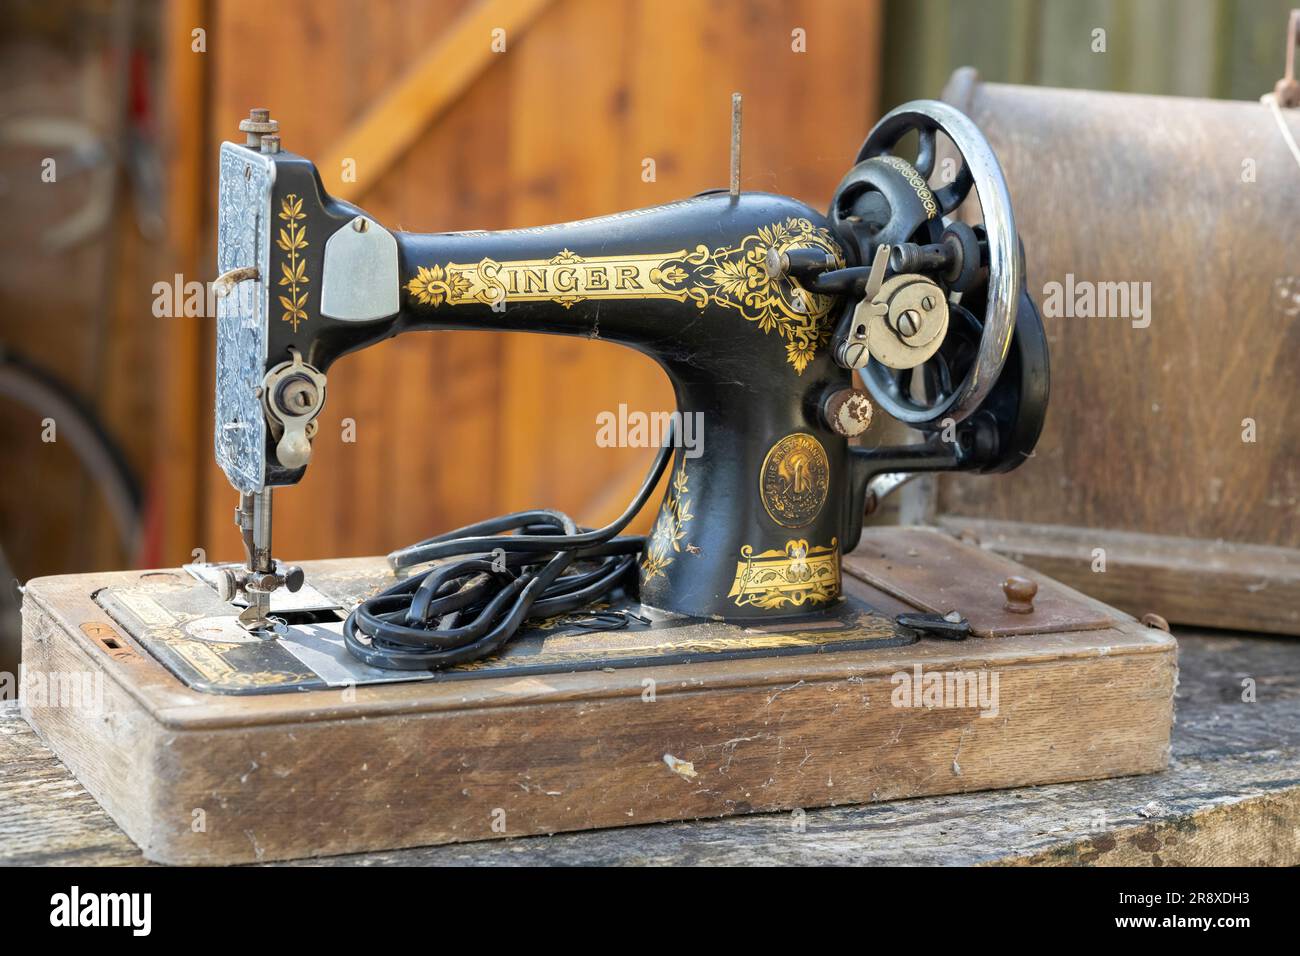 Vintage, old Singer Sewing Machine found in the shed Stock Photo